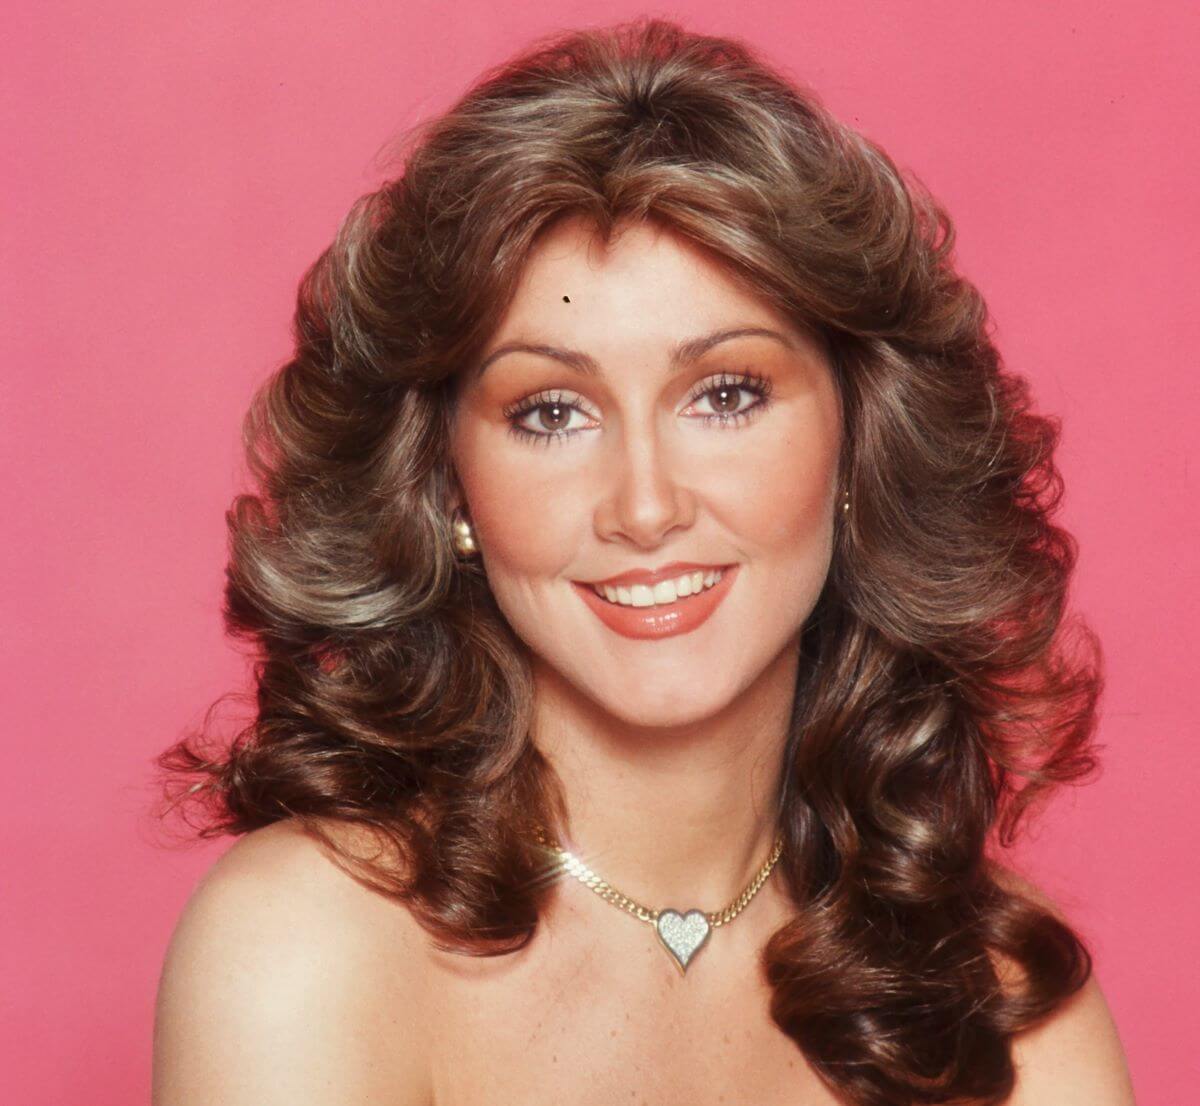 Linda Thompson smiles against a pink background. She wears a heart shaped necklace.